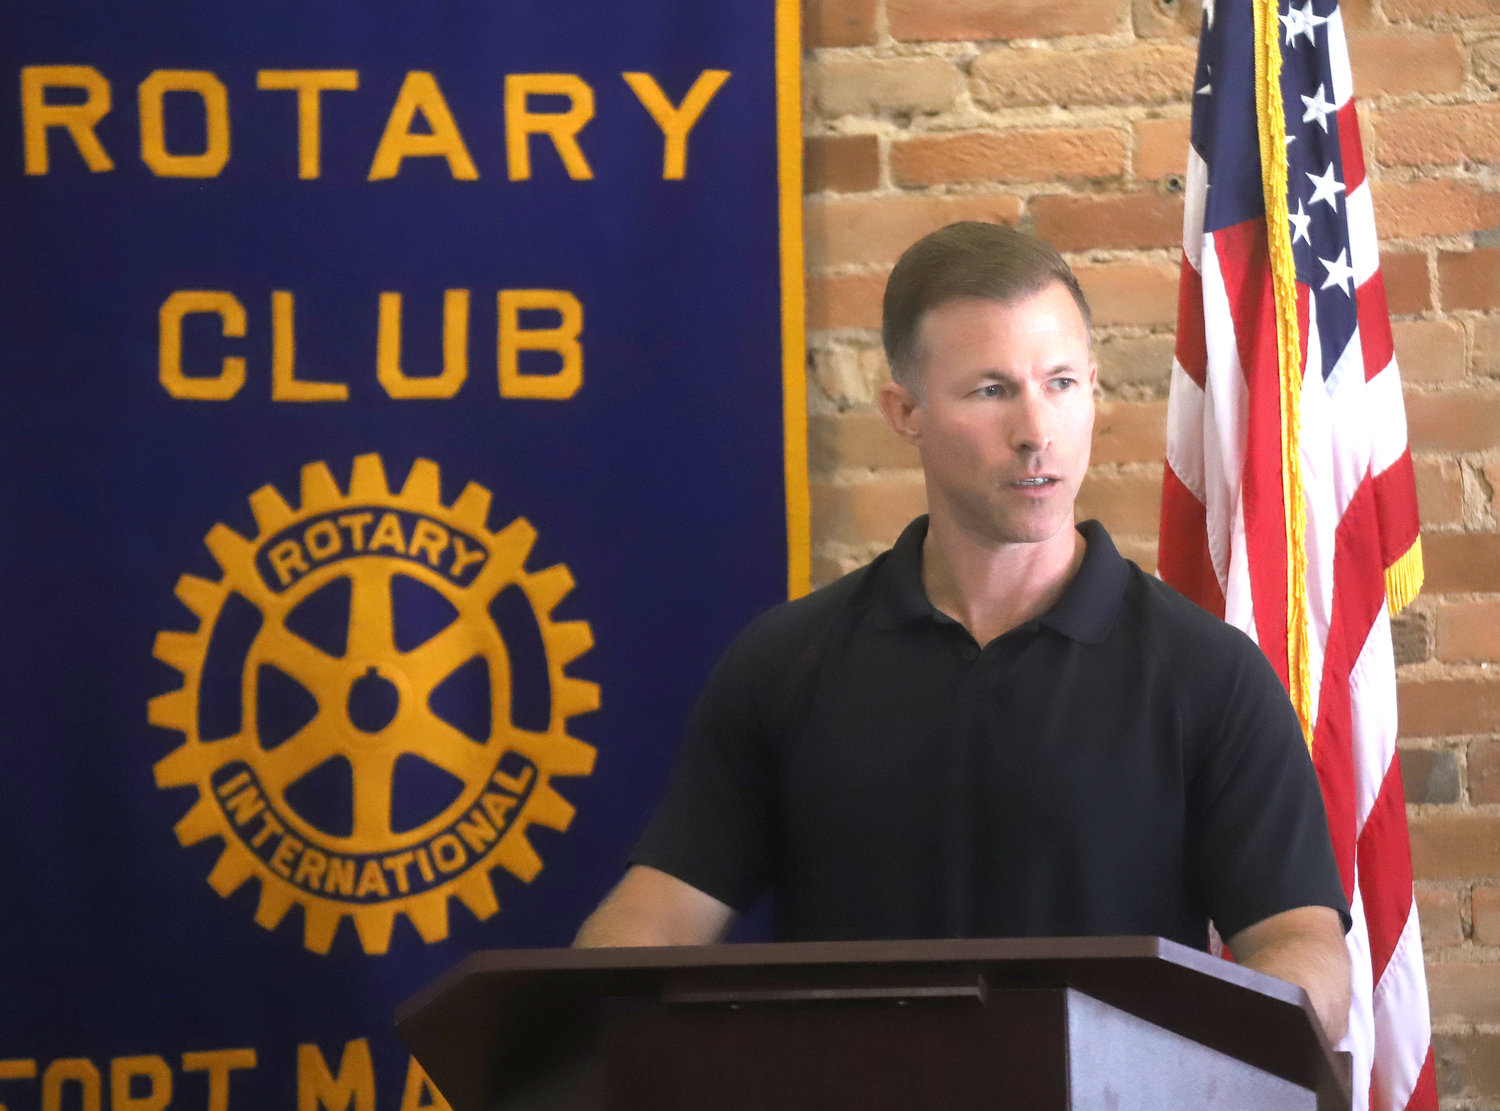 2000 Aquinas graduate Andy Rump talks with Fort Madison Rotarians Tuesday about his career as a naval aviator and weapons specialist, and his role as Tom Cruise's stand-in on Top-Gun-Maverick.